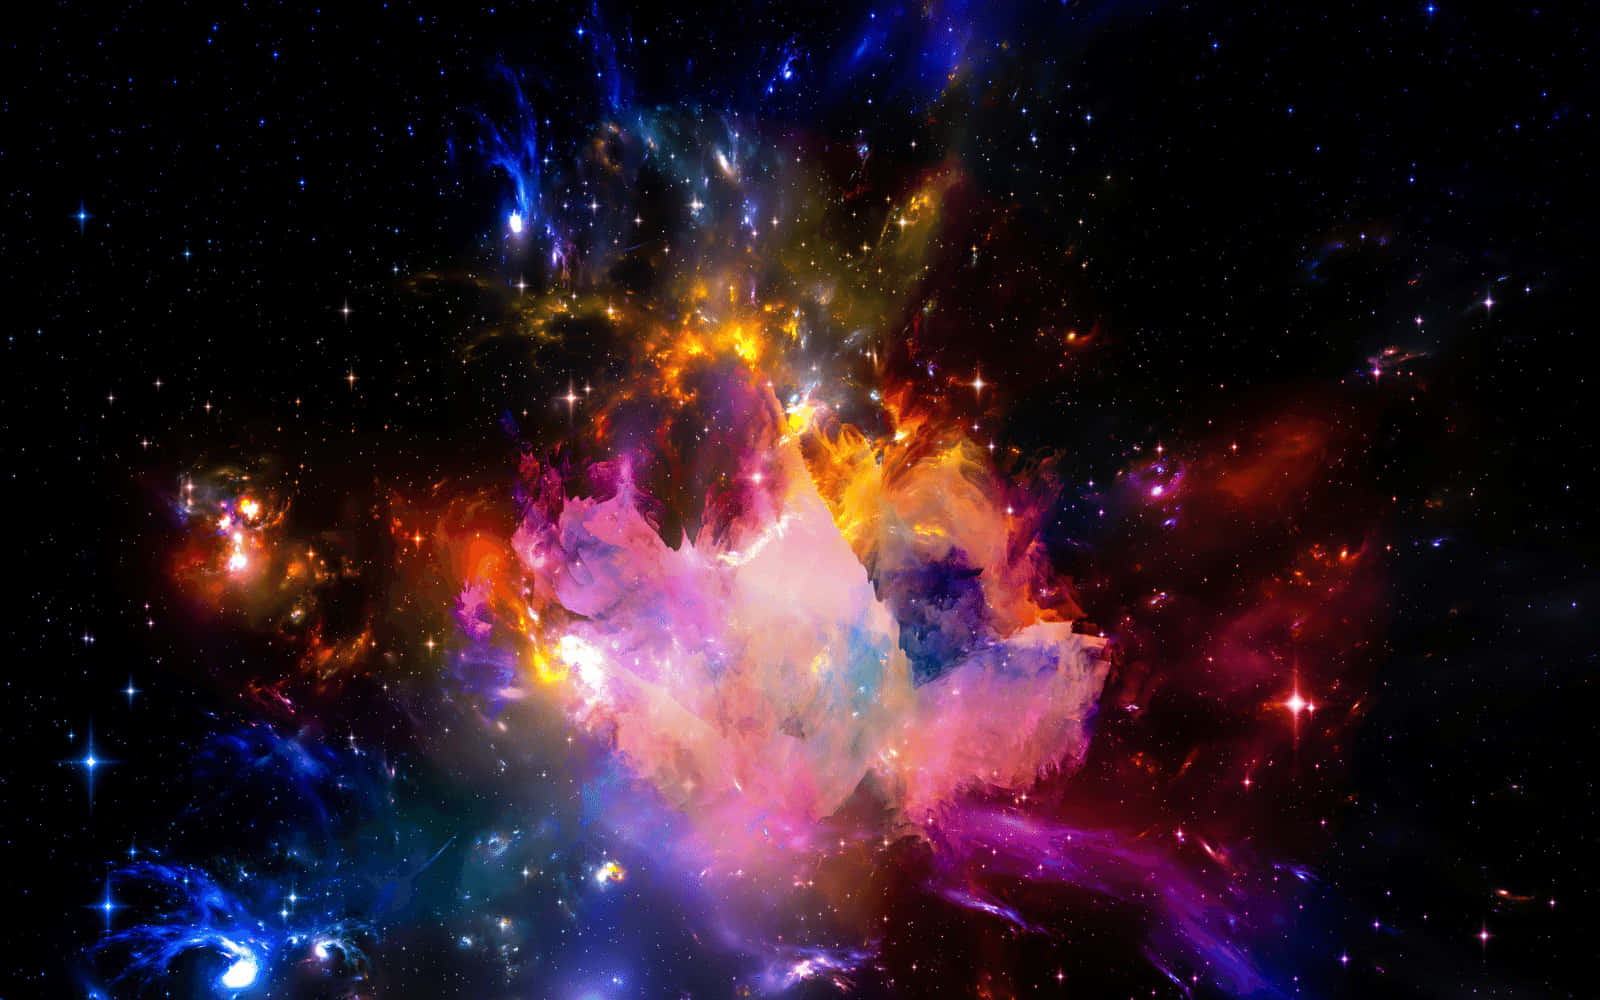 A Colorful Nebula In Space